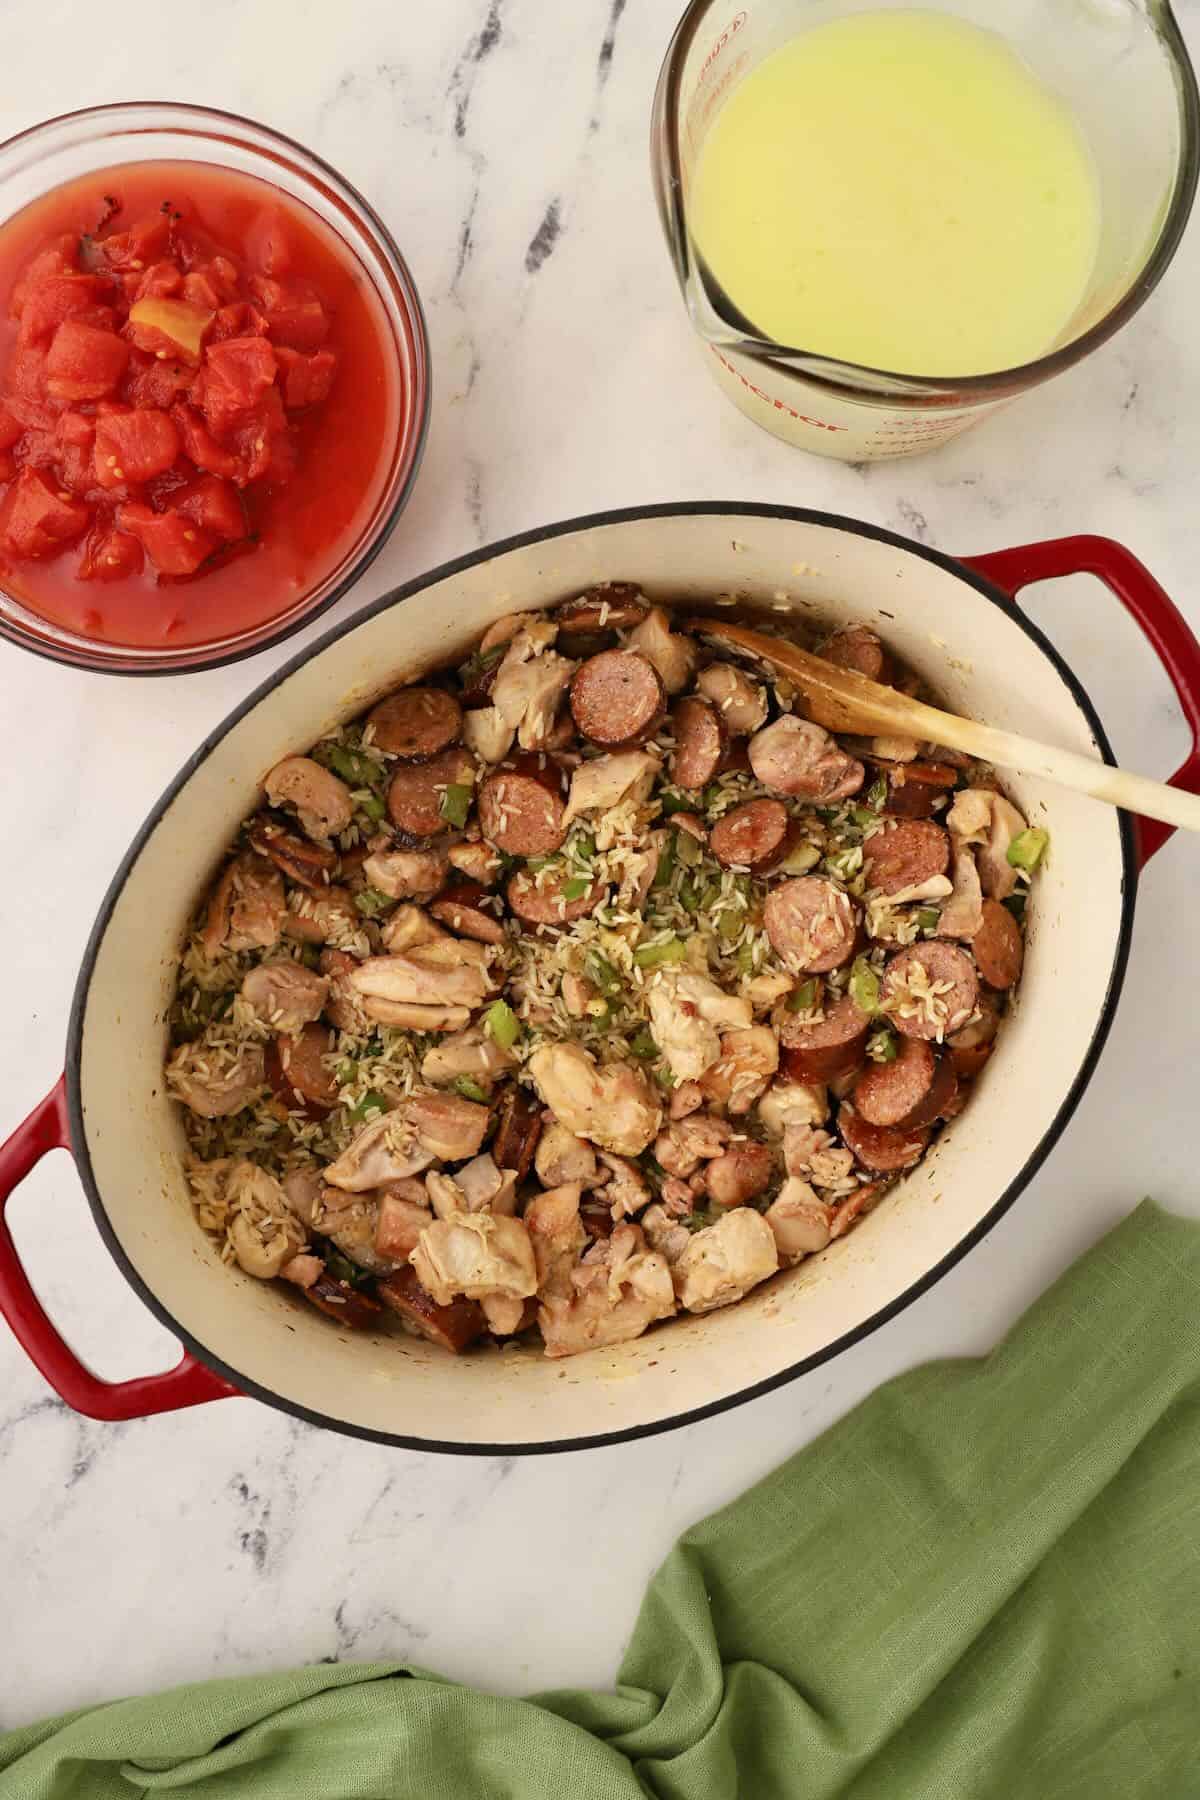 Cooked sausage and chicken added to vegetables and rice in a pan.